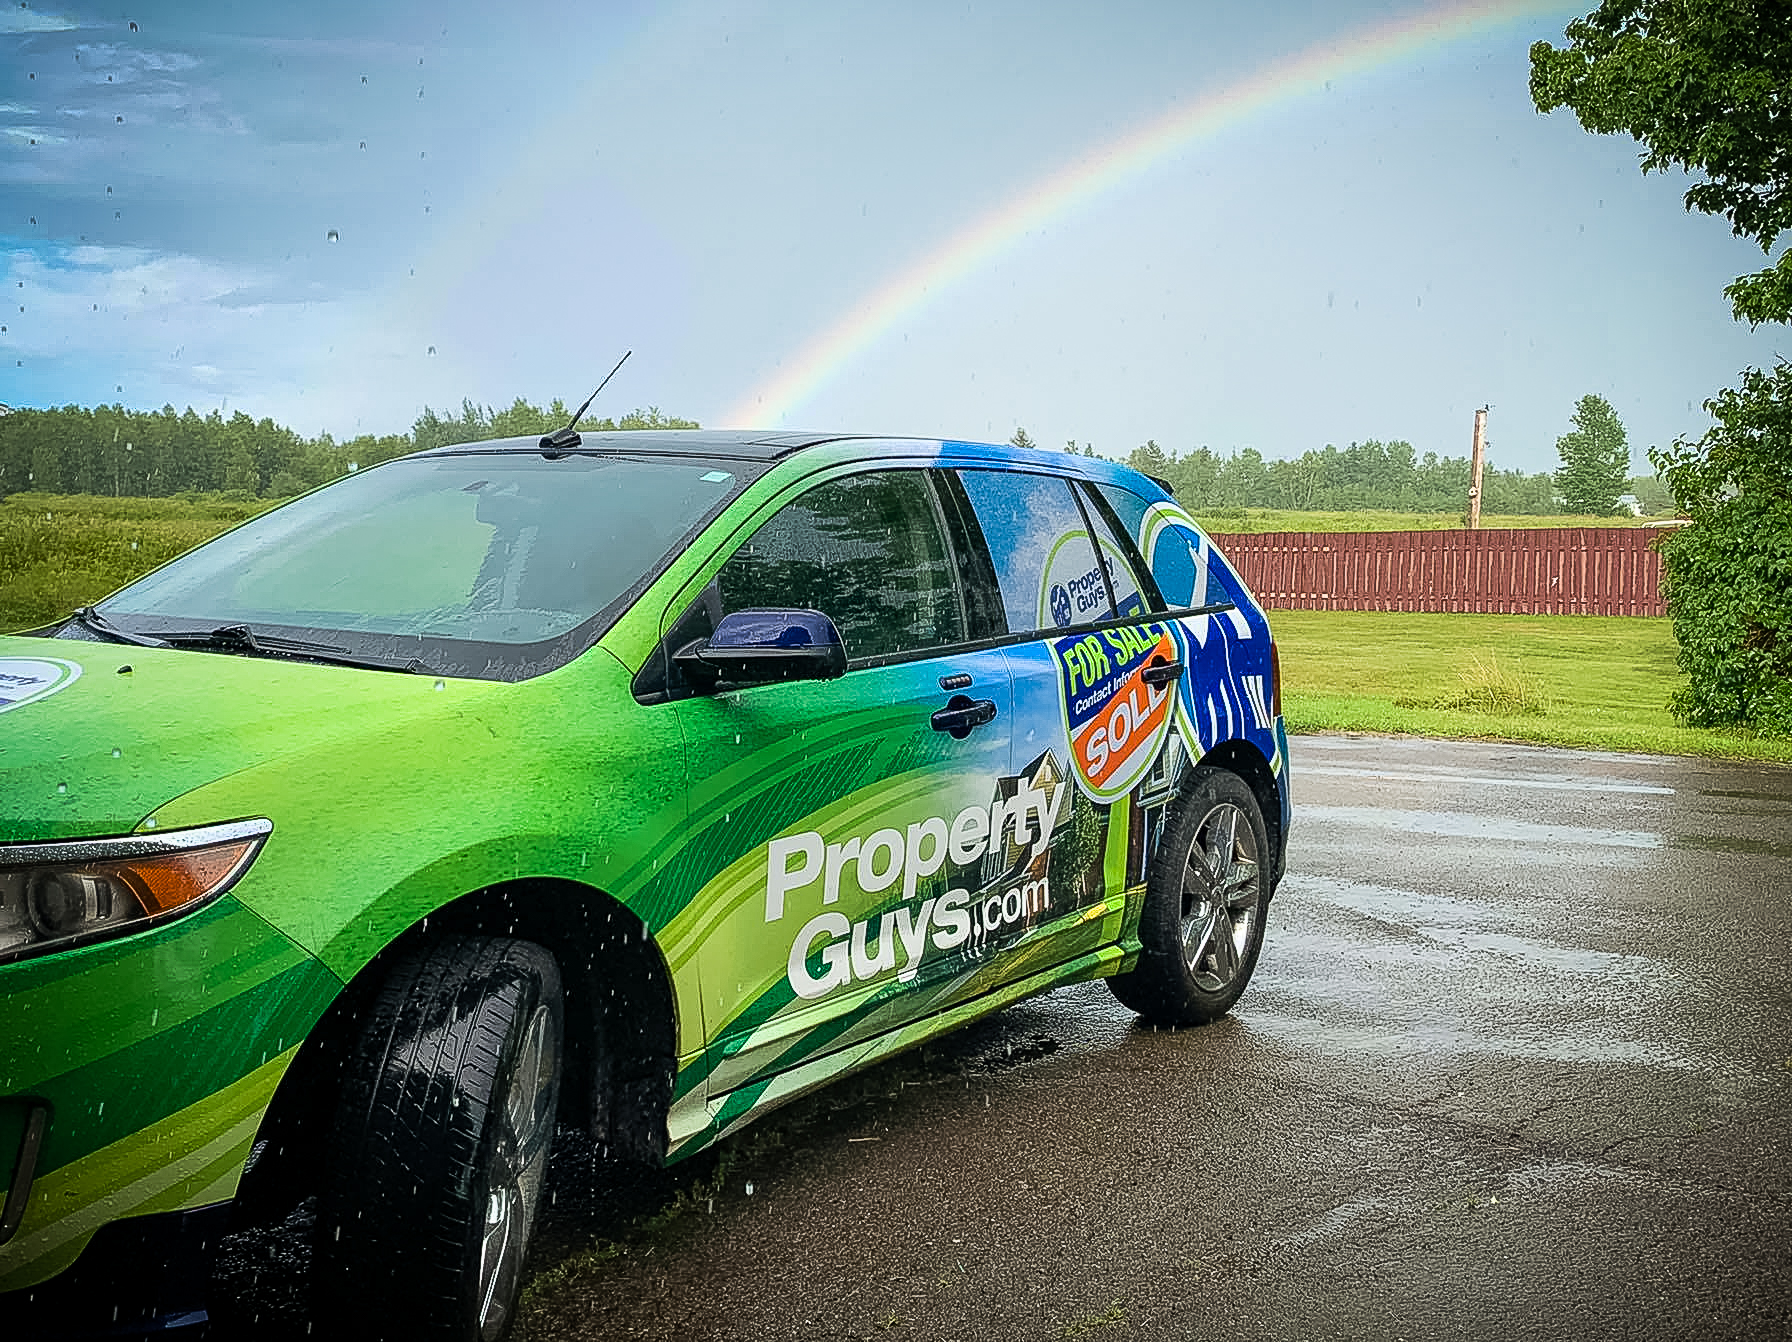 Wrapped Vehicle at the end of a rainbow